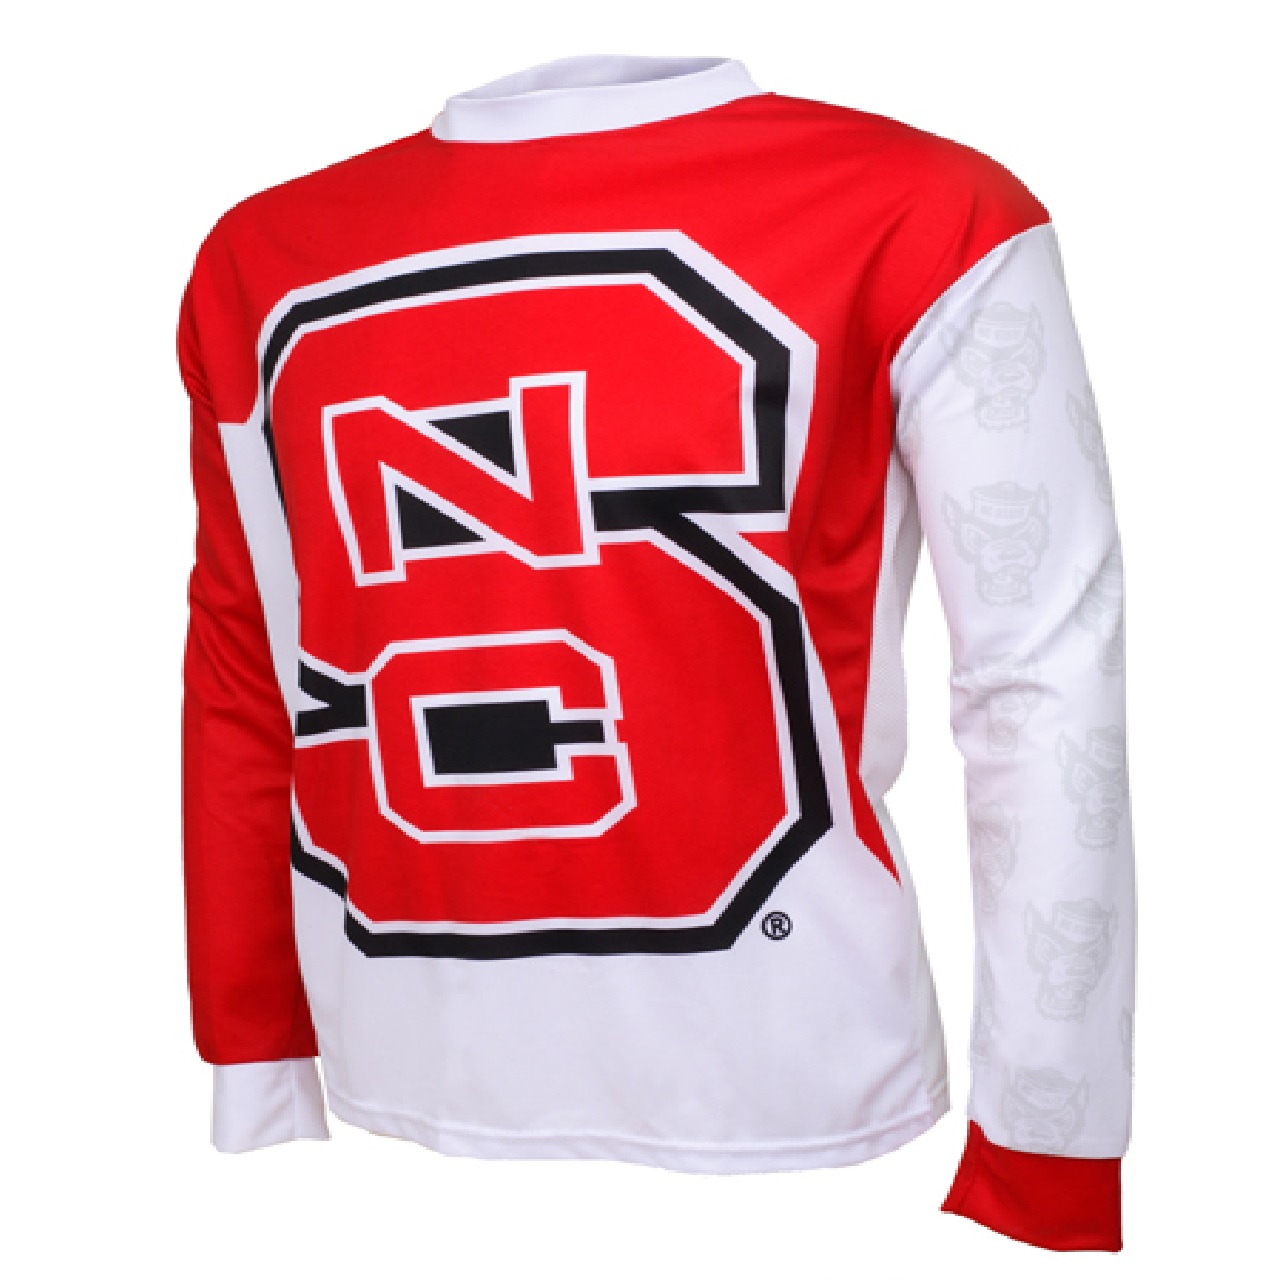 Adrenaline Promo NC State Wolfpack College LS Men's MTB Cycling Jersey